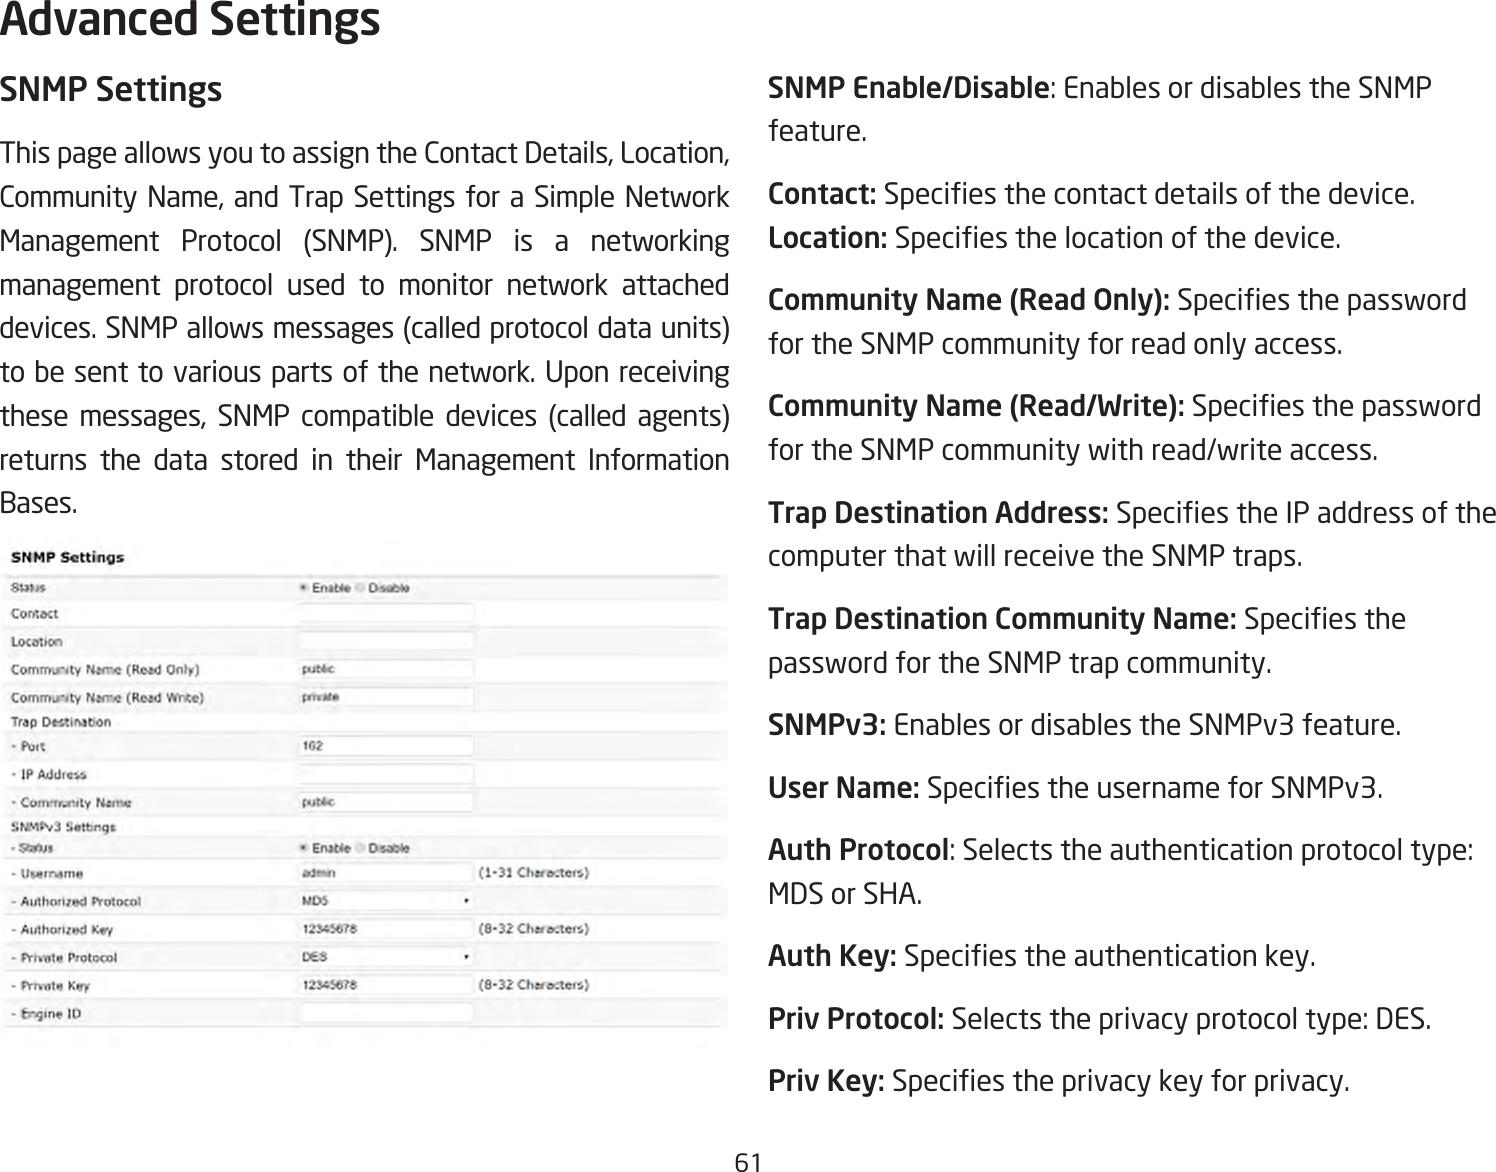 61SNMP SettingsThispageallowsyoutoassigntheContactDetails,Location,CommunityName, andTrap Settingsfor aSimple NetworkManagement Protocol (SNMP). SNMP is a networkingmanagement protocol used to monitor network attached devices.SNMPallowsmessages(calledprotocoldataunits)tobesenttovariouspartsofthenetwork.Upon receivingthese messages, SNMP compatible devices (called agents)returns the data stored in their Management Information Bases.SNMP Enable/Disable:EnablesordisablestheSNMPfeature.Contact: Speciesthecontactdetailsofthedevice.Location: Speciesthelocationofthedevice.Community Name (Read Only): Speciesthepasswordfor the SNMP community for read only access.Community Name (Read/Write):Speciesthepasswordfor the SNMP community with read/write access.Trap Destination Address:SpeciestheIPaddressofthecomputer that will receive the SNMP traps.Trap Destination Community Name: Speciesthepassword for the SNMP trap community.SNMPv3: Enables or disables the SNMPv3 feature.User Name:SpeciestheusernameforSNMPv3.Auth Protocol:Selectstheauthenticationprotocoltype:MDS or SHA.Auth Key: Speciestheauthenticationkey.Priv Protocol:Selectstheprivacyprotocoltype:DES.Priv Key: Speciestheprivacykeyforprivacy.Advanced Settings